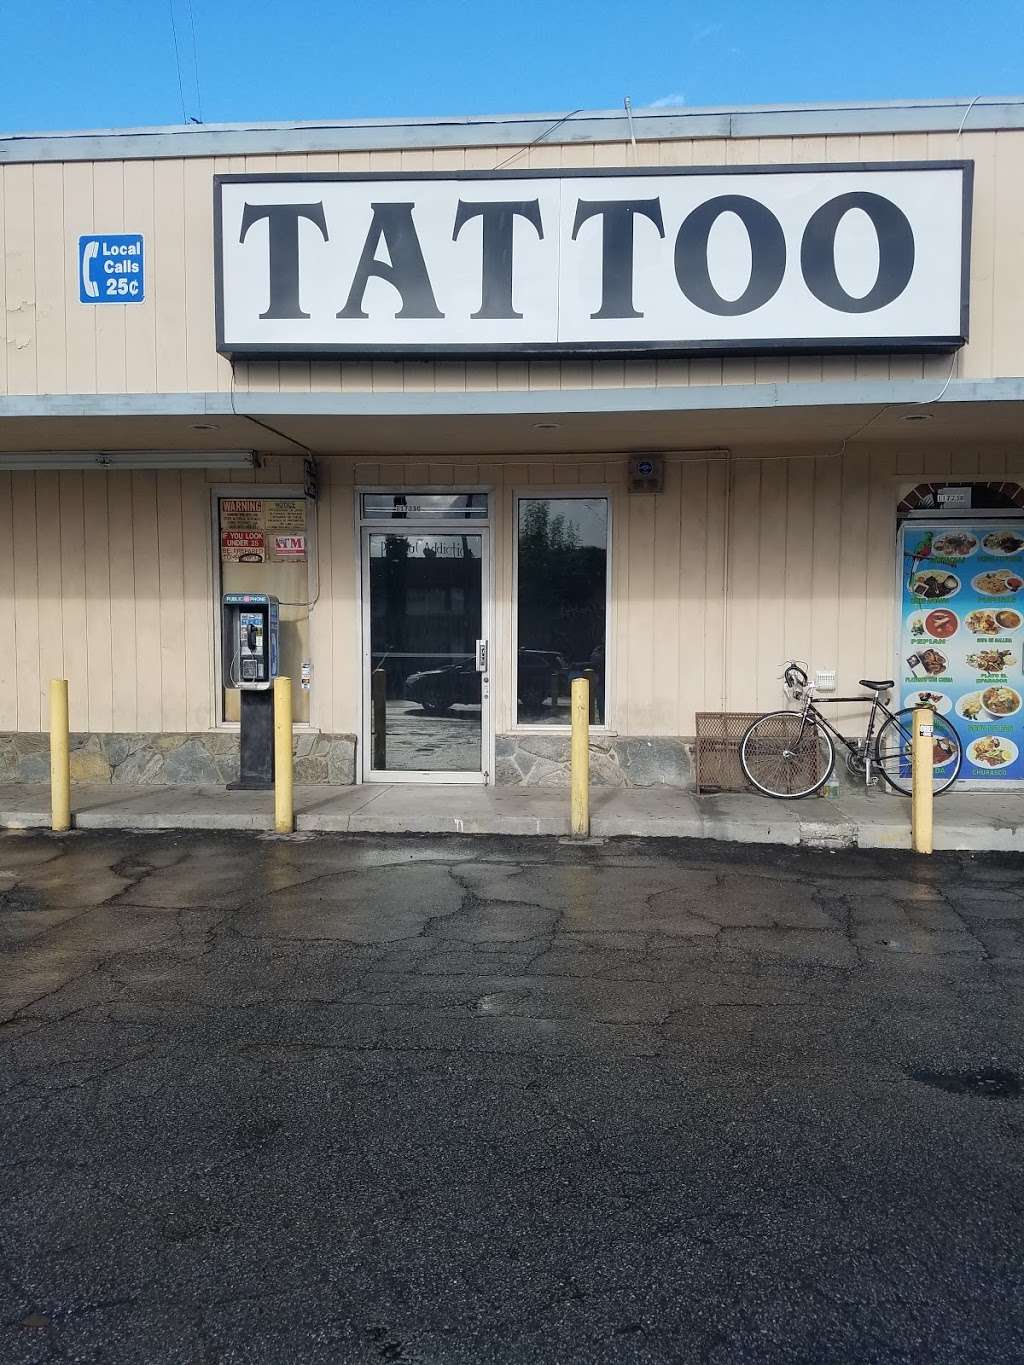 Painful Addiction Tattoos/Supplies | 11723 Saticoy St #C, North Hollywood, CA 91605 | Phone: (818) 723-8705